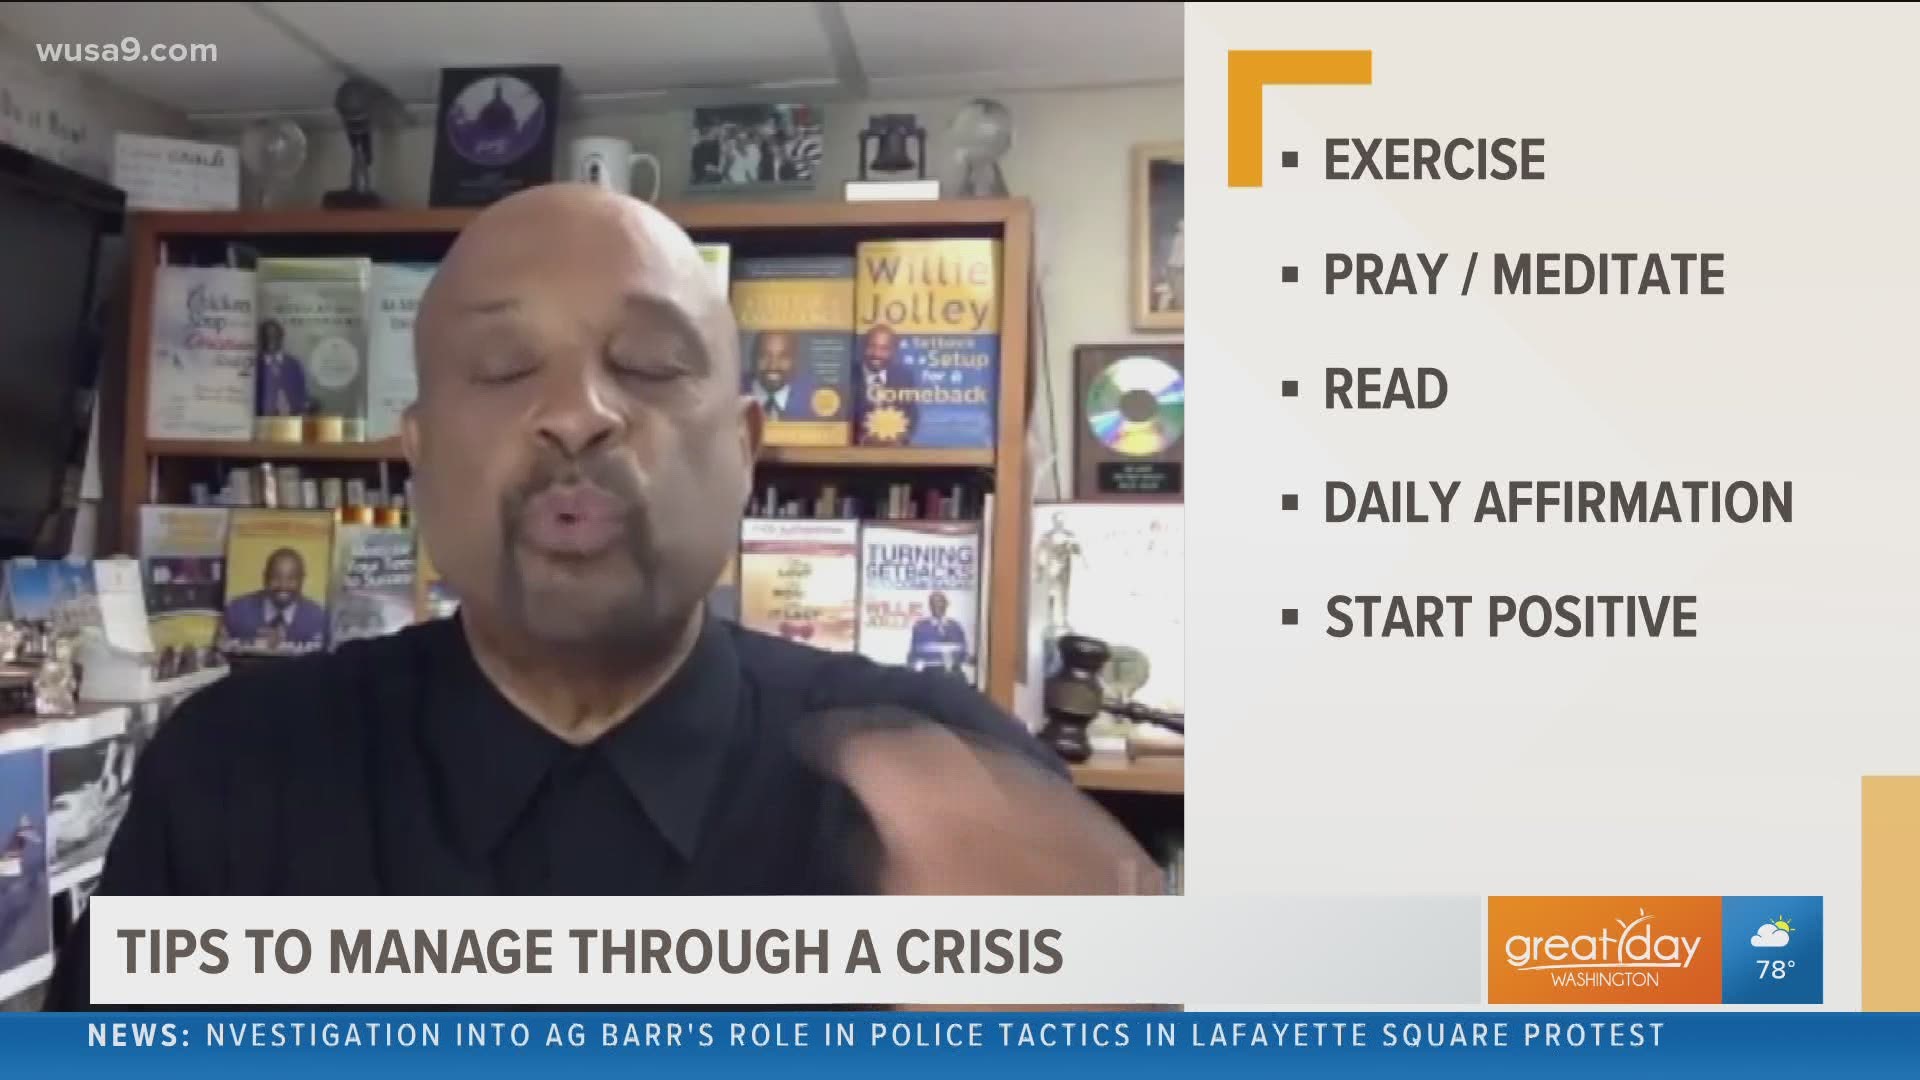 Dr. Willie Jolley shares some tips on how to manage through a crisis.